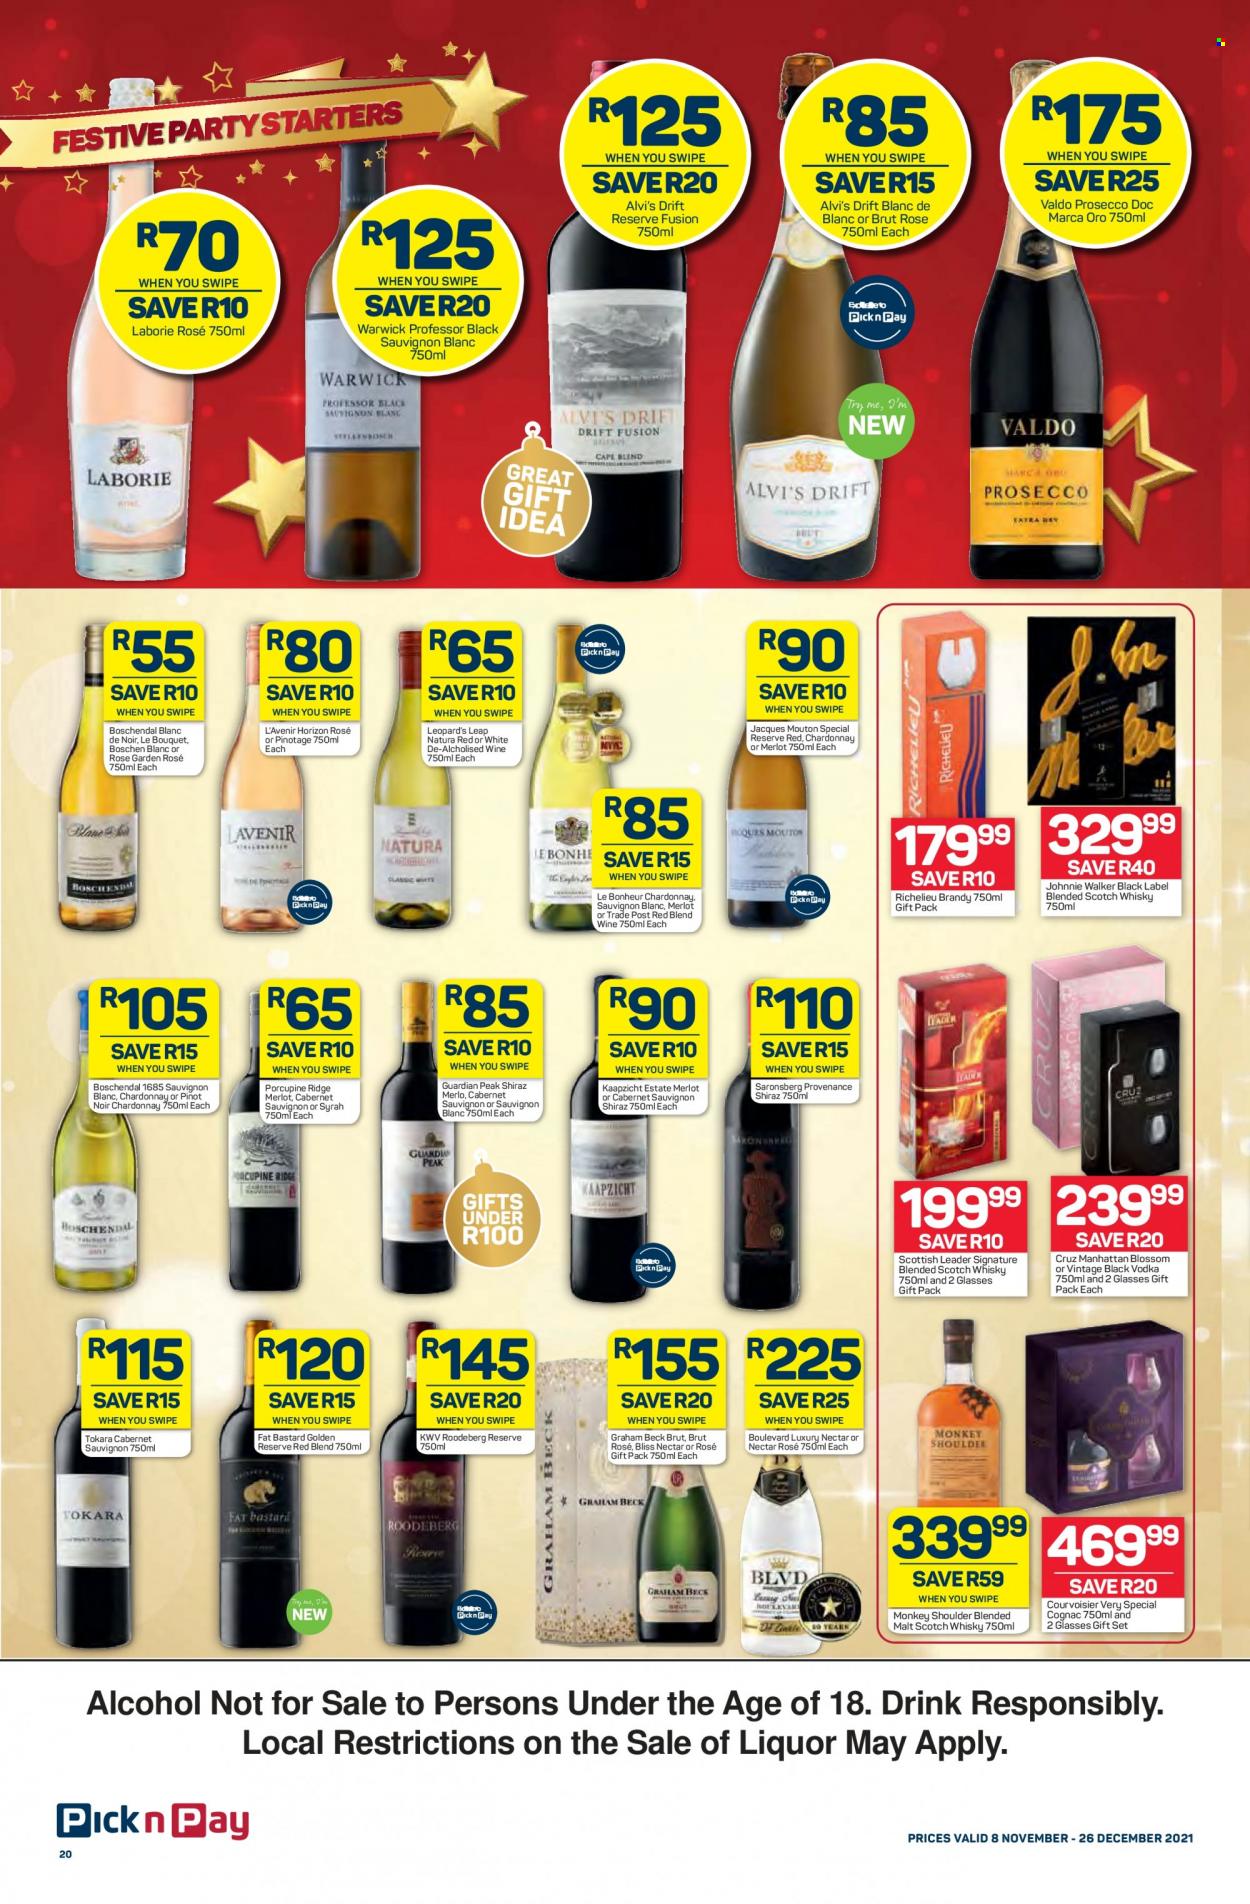 Pick n Pay specials - 11.08.2021 - 12.26.2021. 